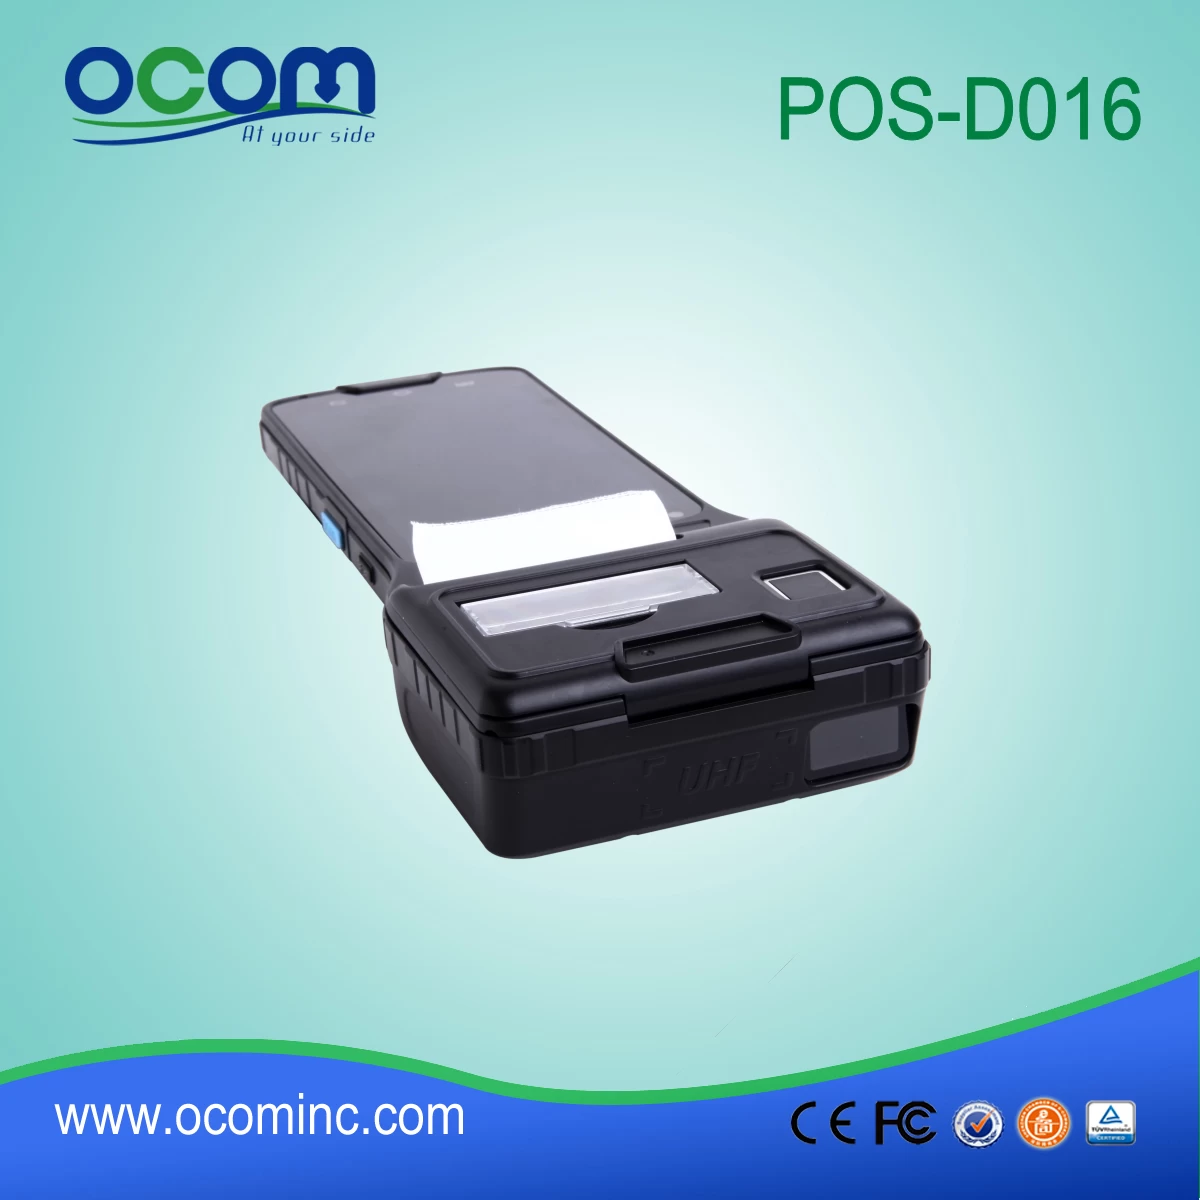 5'' Touch Screen Pos Terminal with 3G(WCDMA)+ WIFI+BT+ GPS+ camera+ thermal printer+ NFC (OCBS-D016)